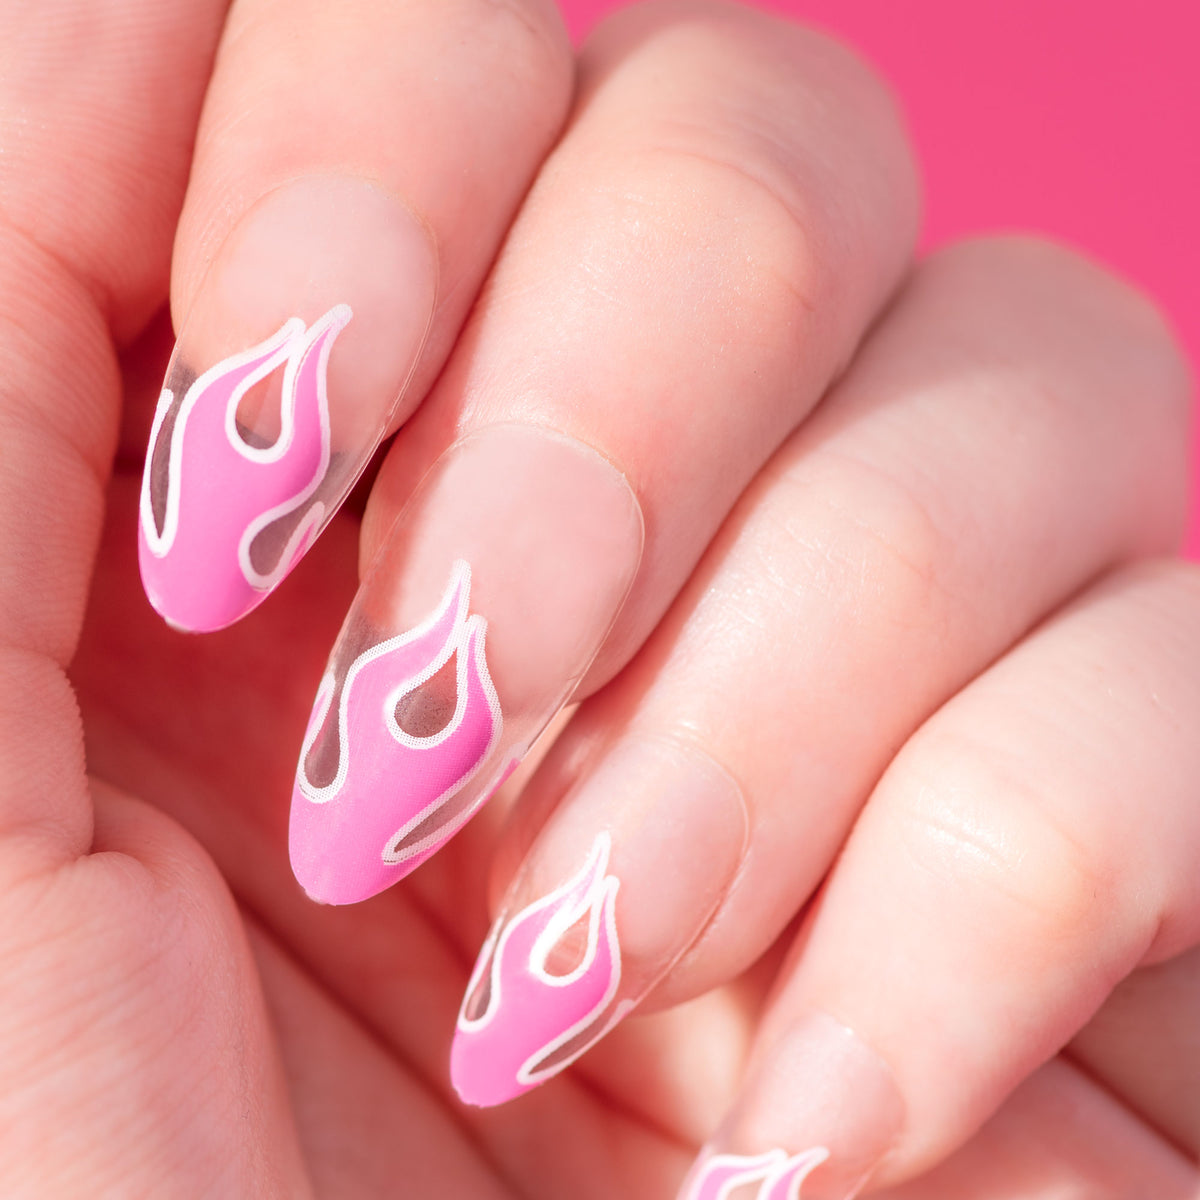 PINK JELLY FLAME PRESS ON NAILS